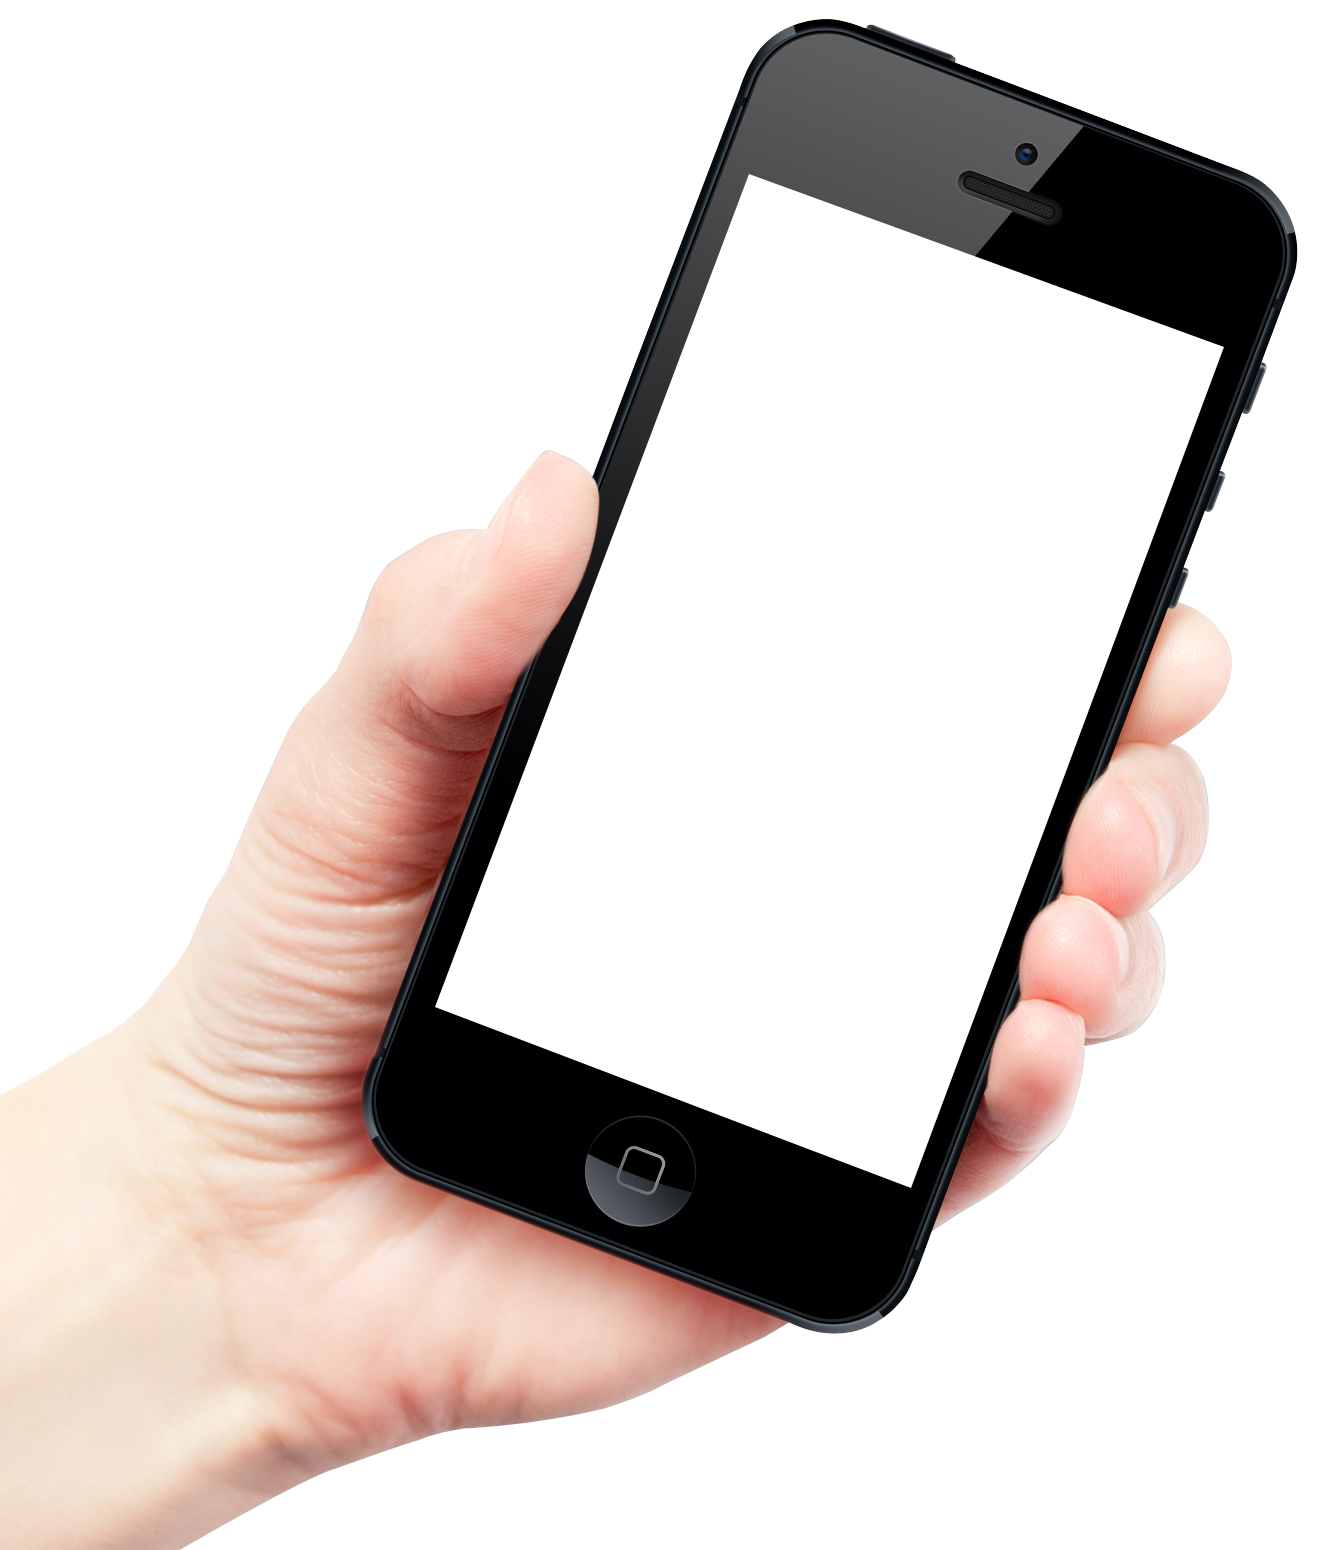 Phone in hand PNG